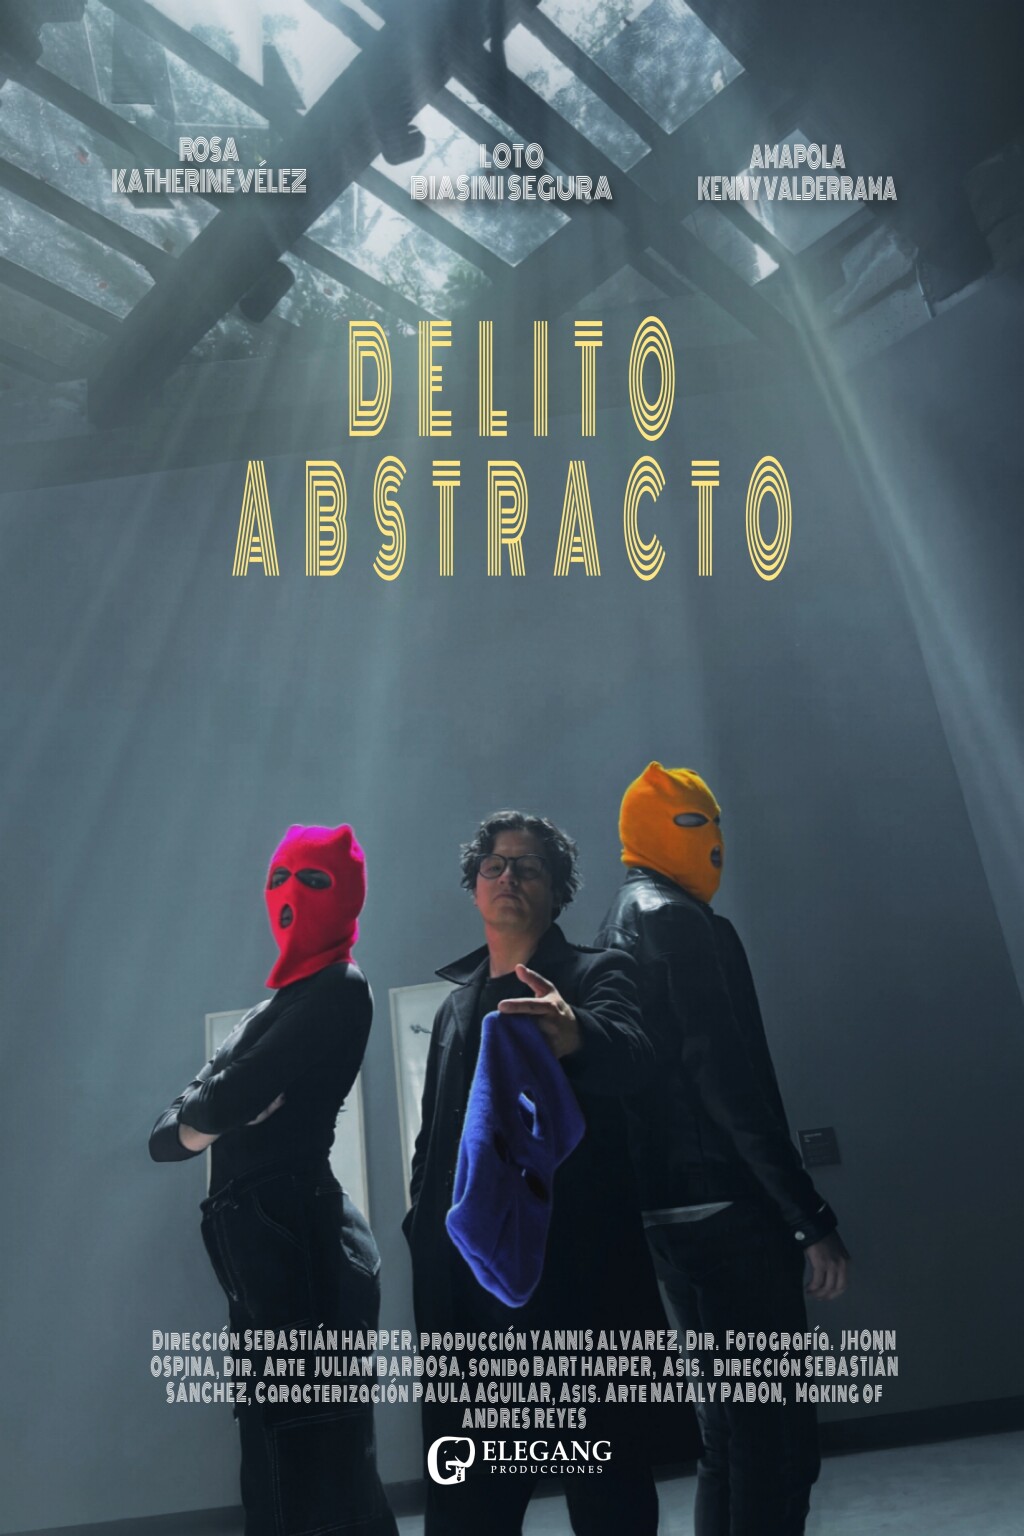 Filmposter for DELITO ABSTRACTO